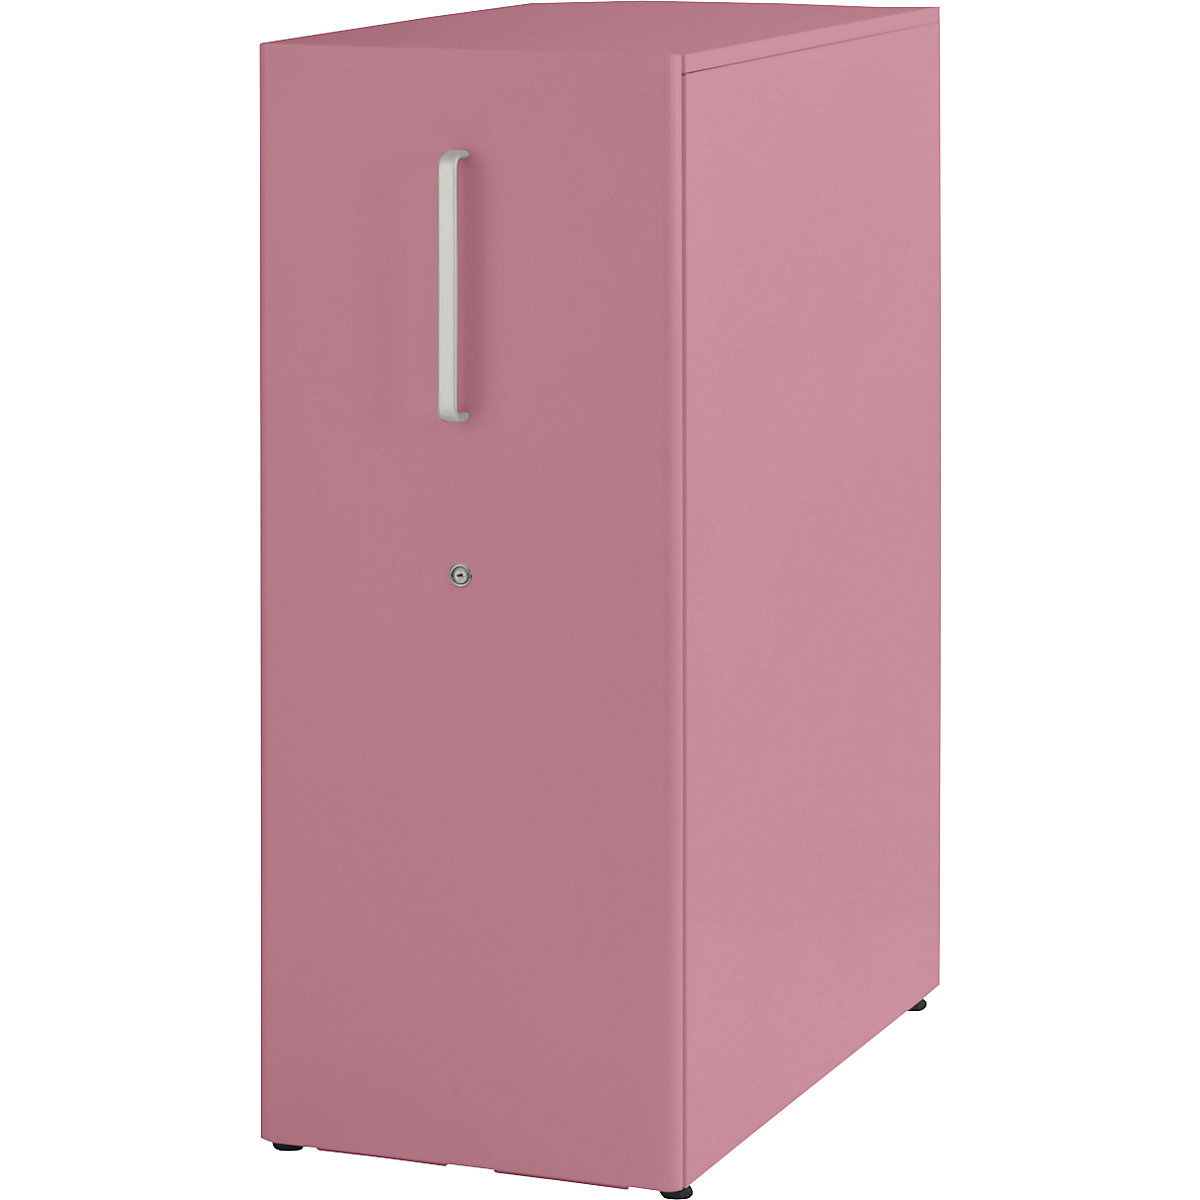 Tower™ 3 add-on furniture, with worktop – BISLEY, for the right side, 3 shelves, pink-18